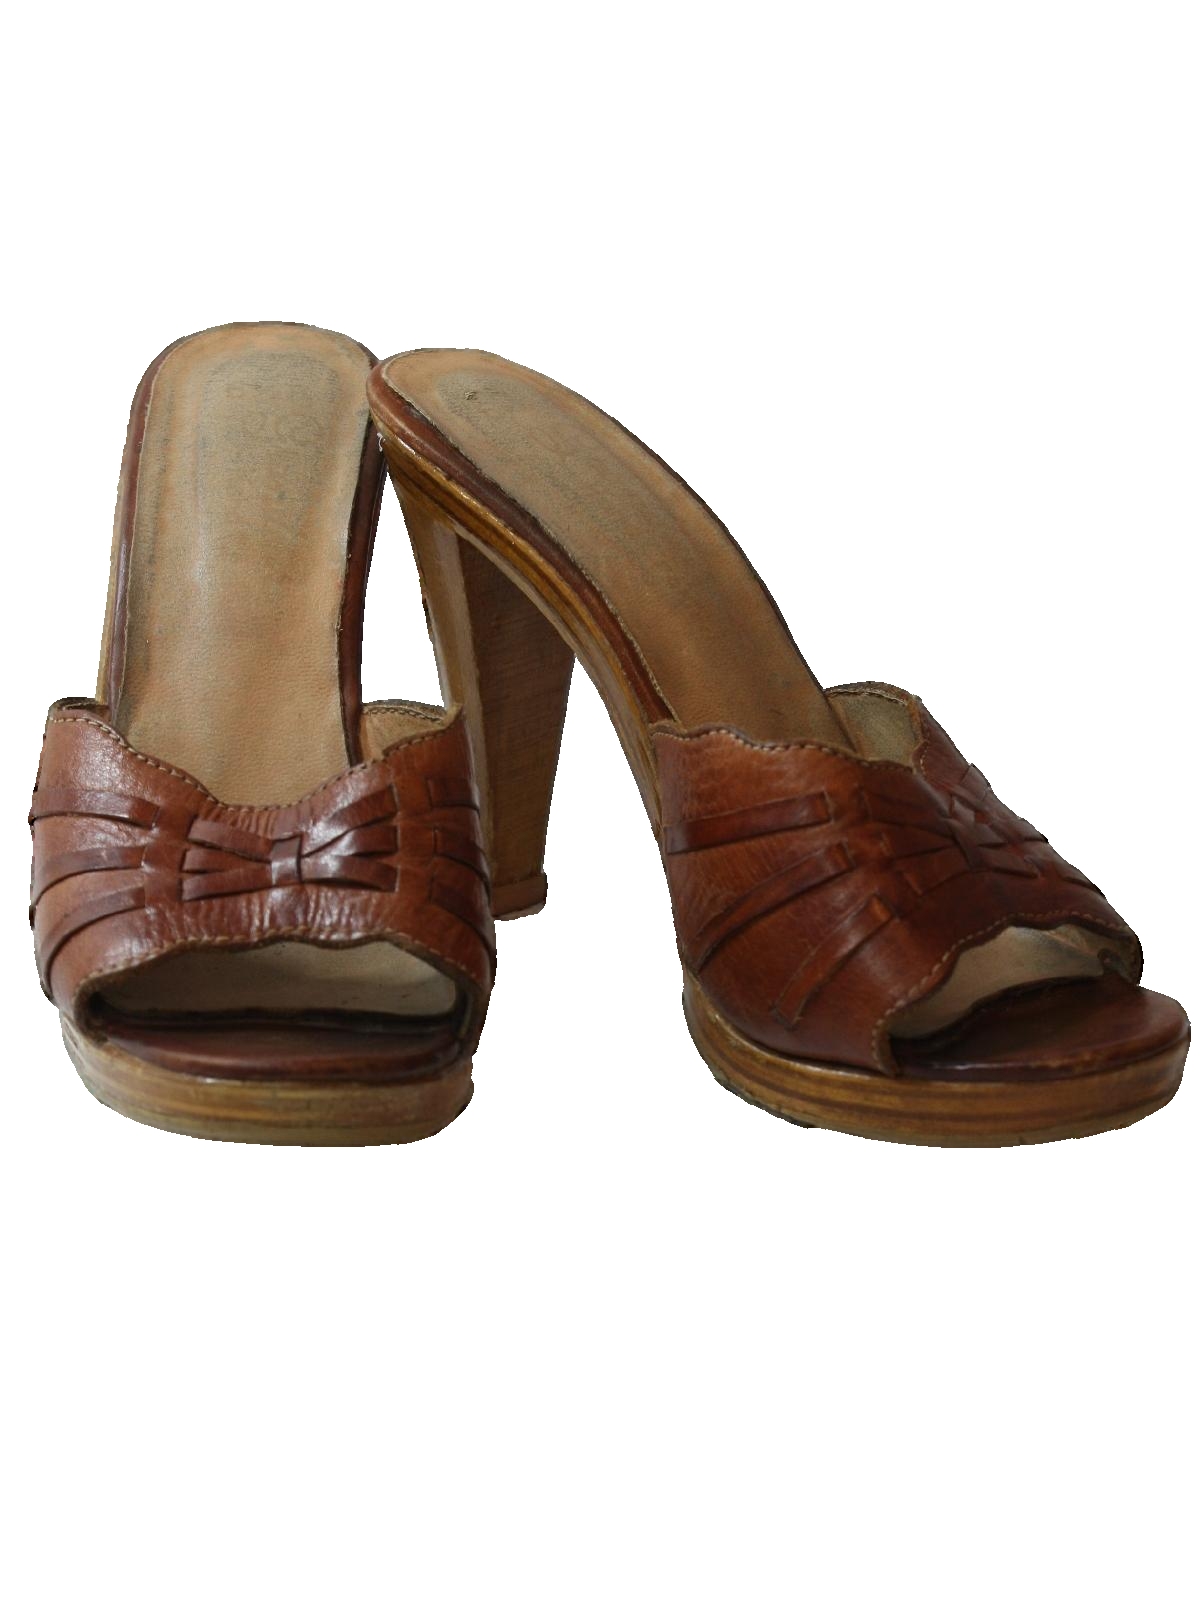 Retro 1970's Shoes (Missing Label) : 70s -Missing Label- Womens brown ...